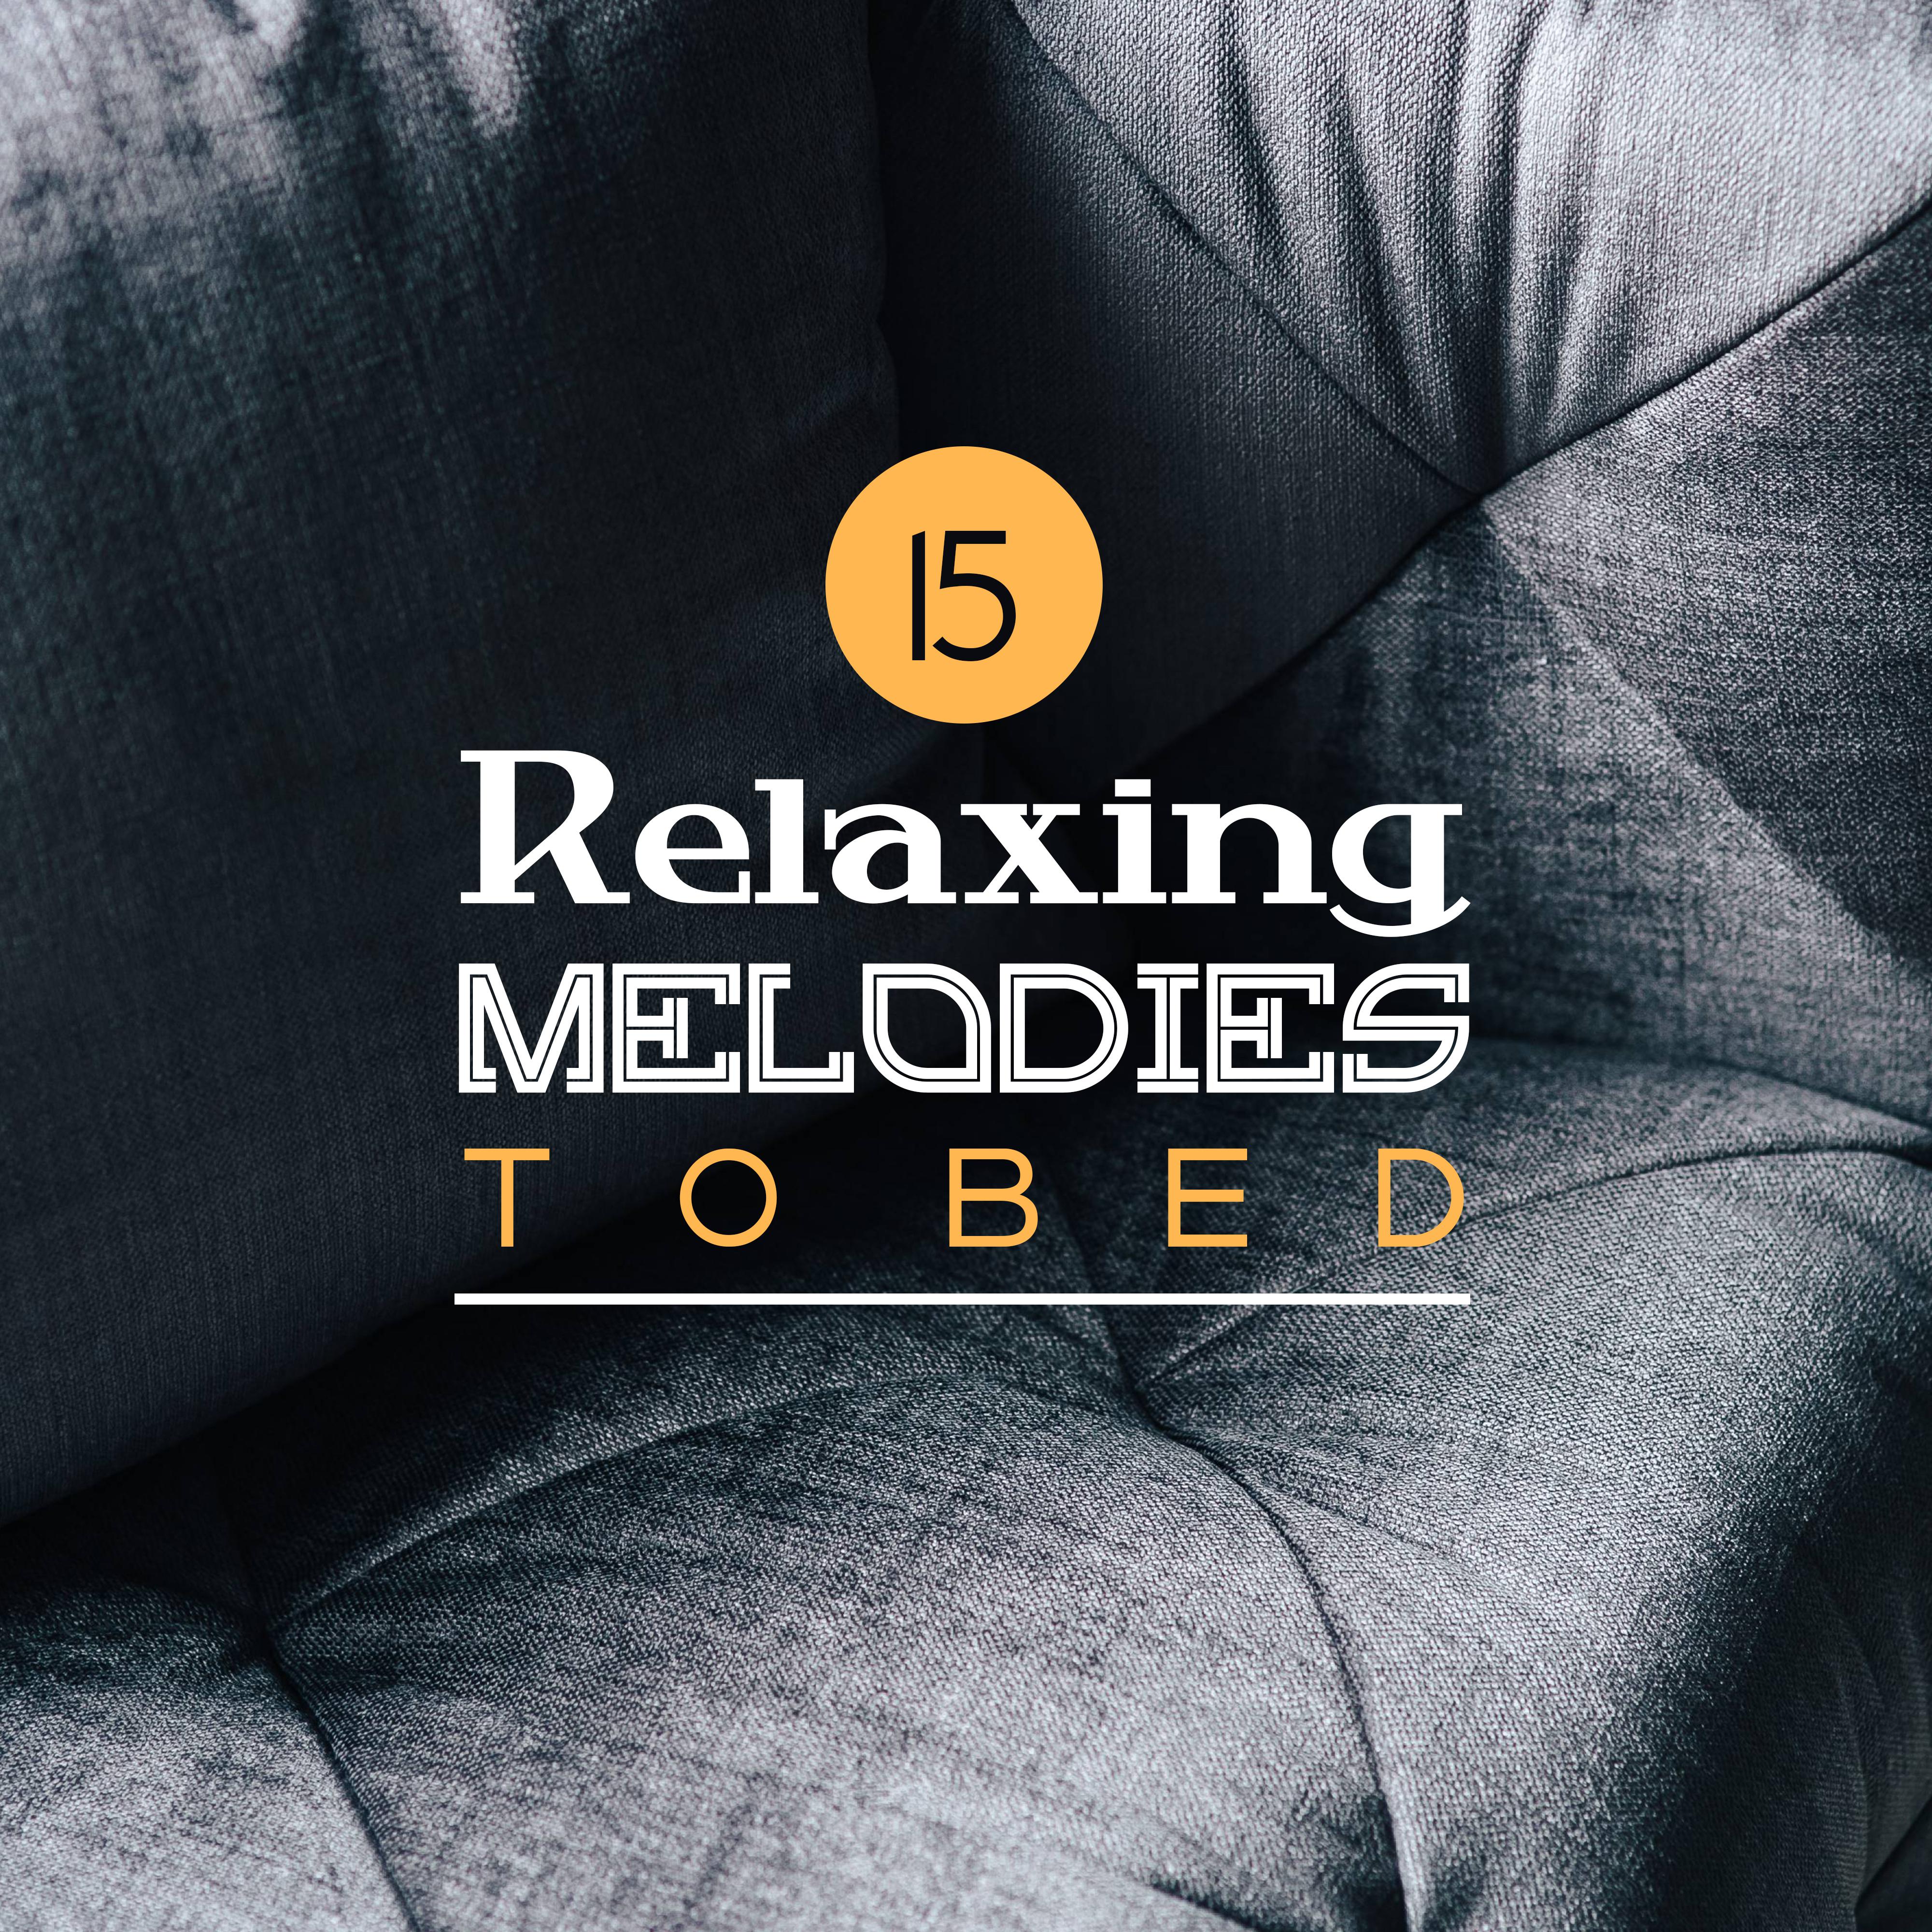 15 Relaxing Melodies to Bed – Restful Sleep, Ambient Music, Calm Down, Sweet Dreams, Lullaby